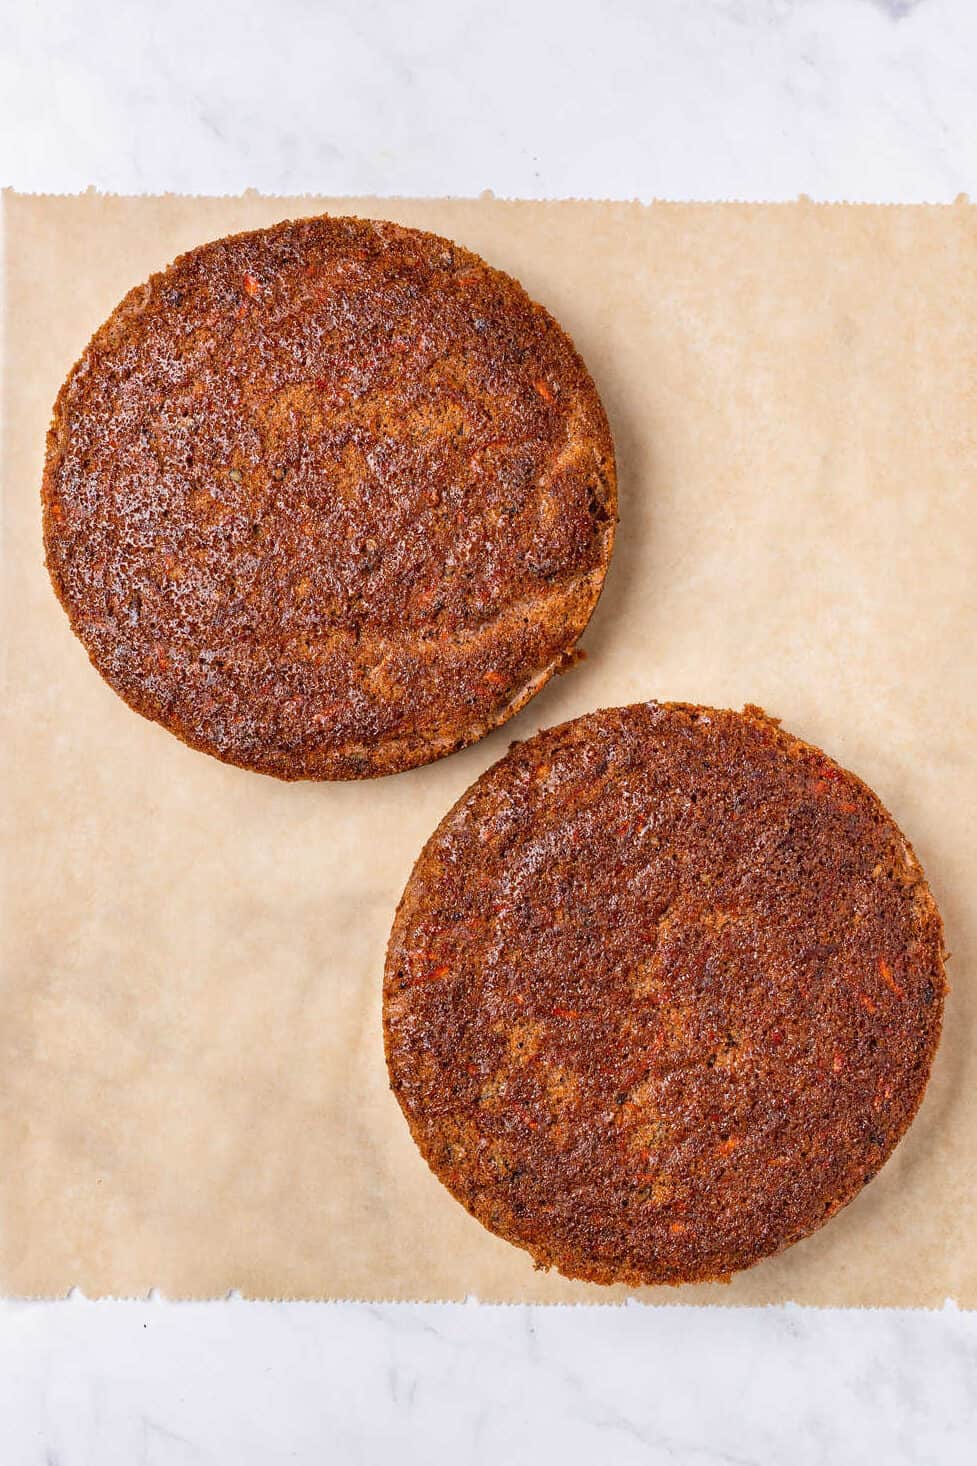 top down image of two 9-inch baked carrot cakes.